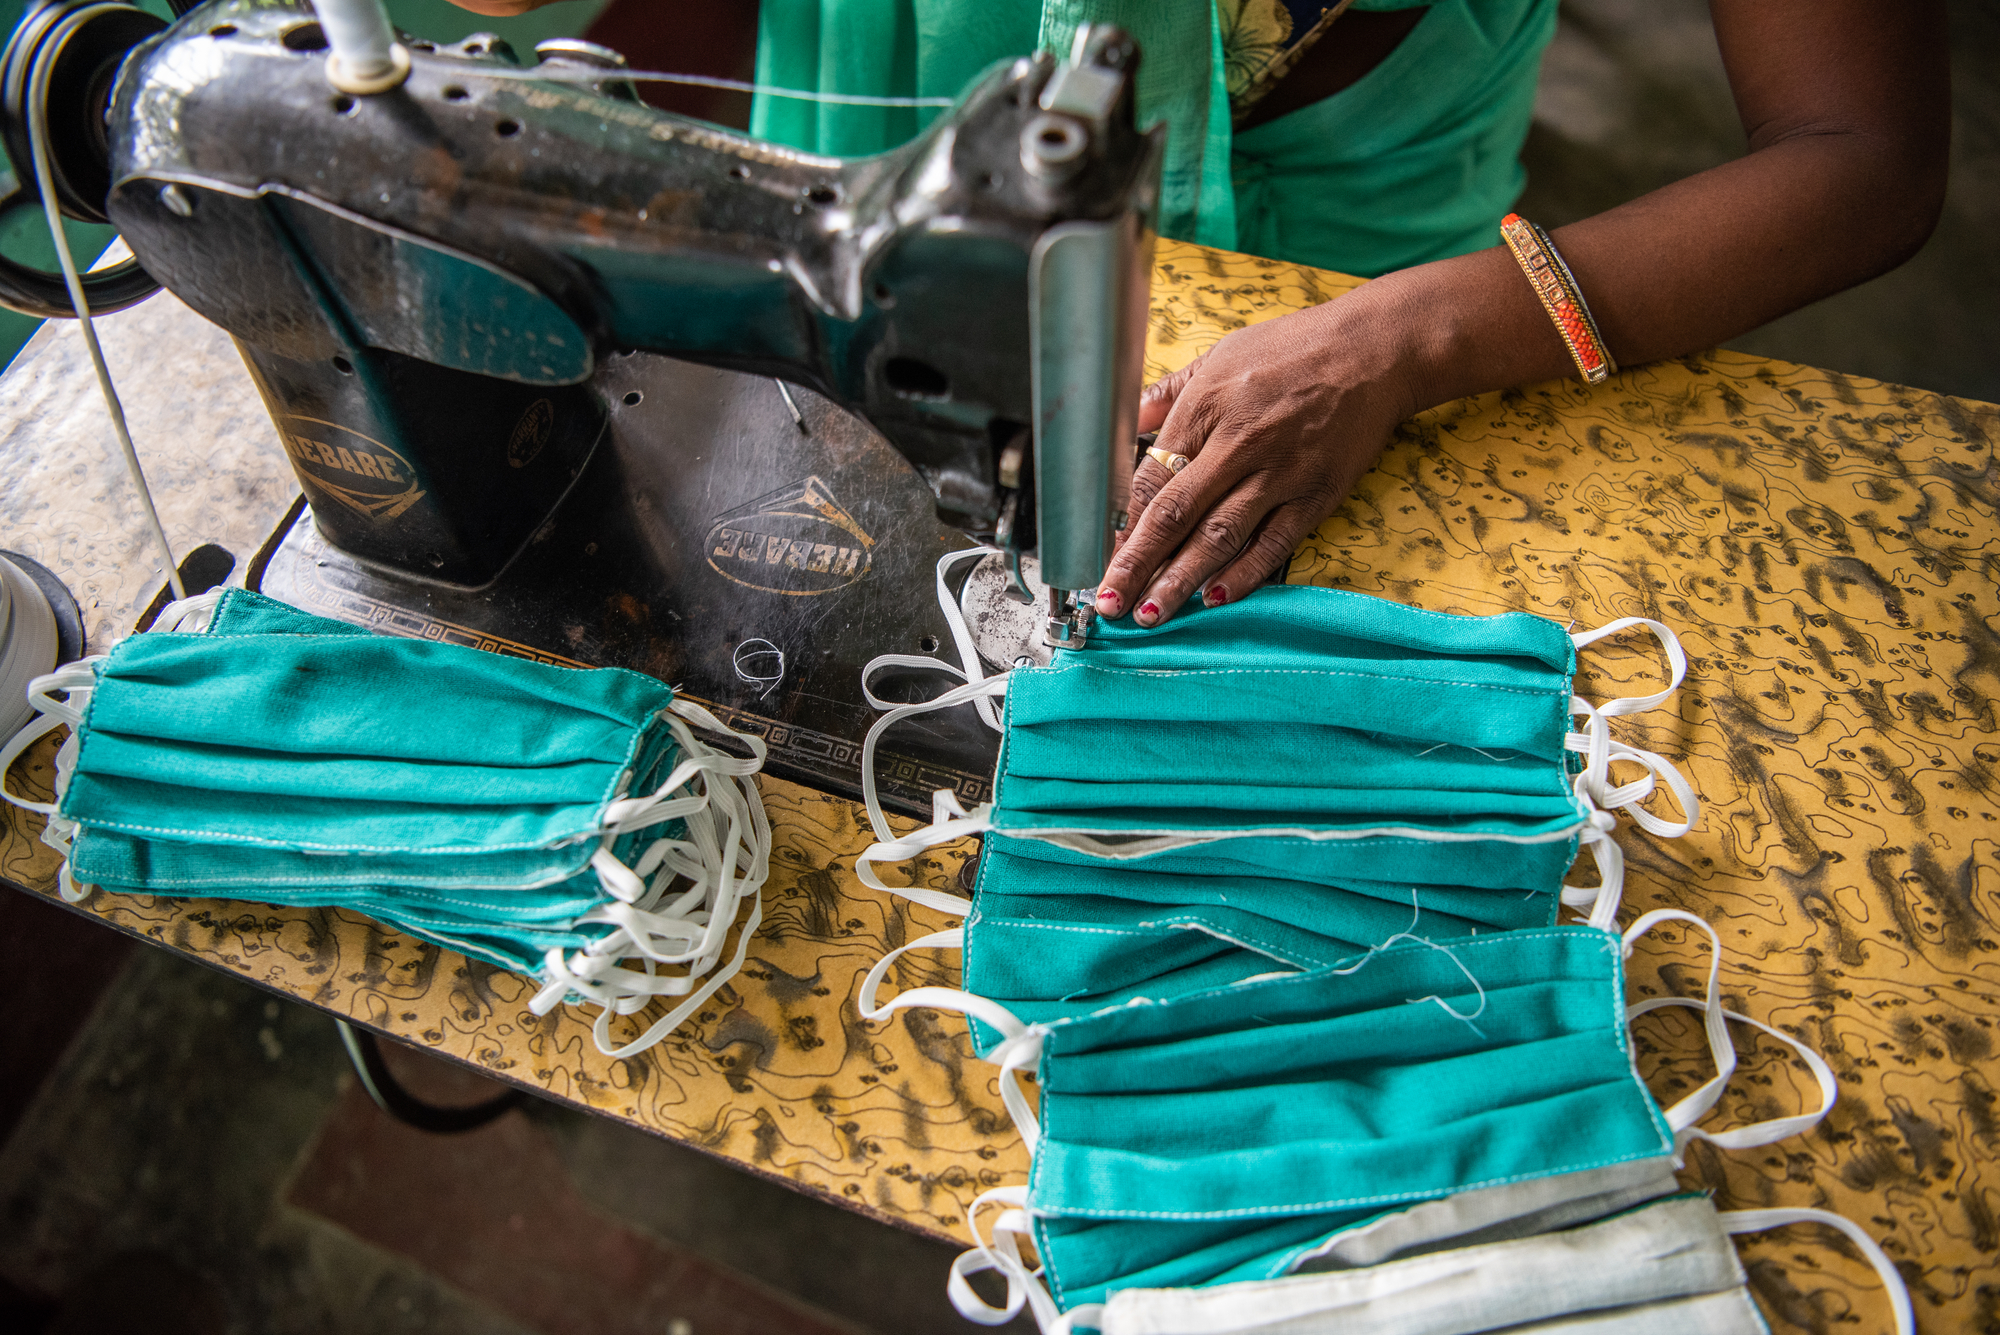 'JEEViKA Didis' (members of the self help group organized by JEEViKA) stitch masks at the mask production center in Daulatpur Deoria, Bihar, India on August 27, 2021. 'JEEViKA Didis' were instrumental in spreading awareness about COVID-19 vaccines at the peak of the pandemic. 